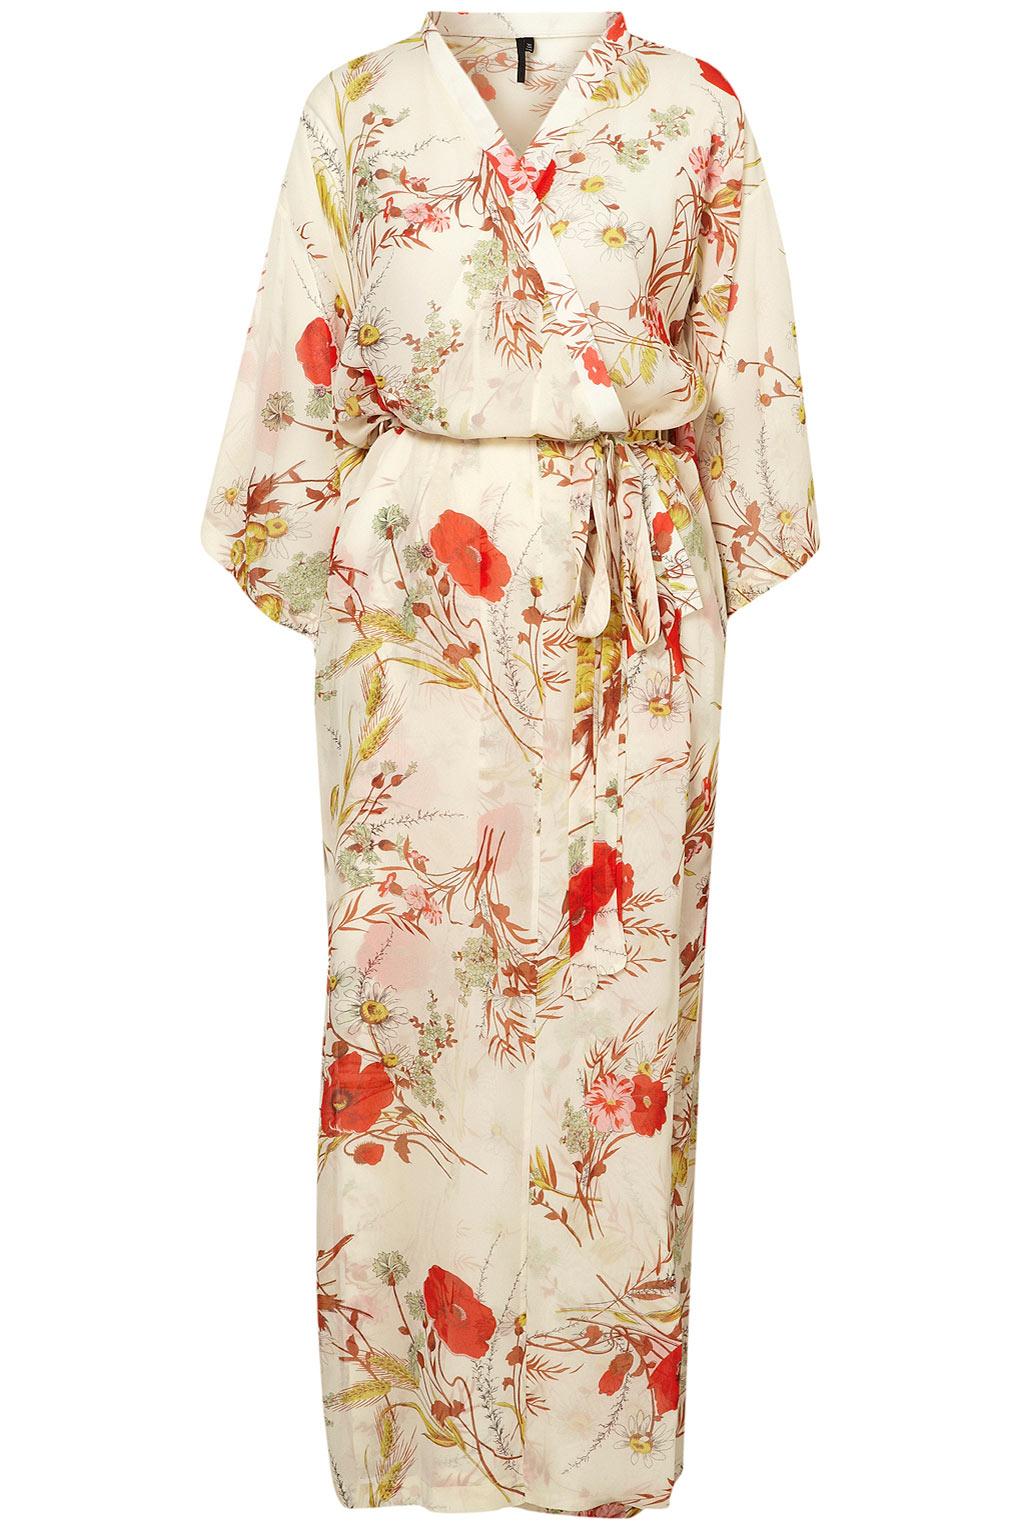 Topshop Poppy Print Kimono By Boutique in Natural | Lyst